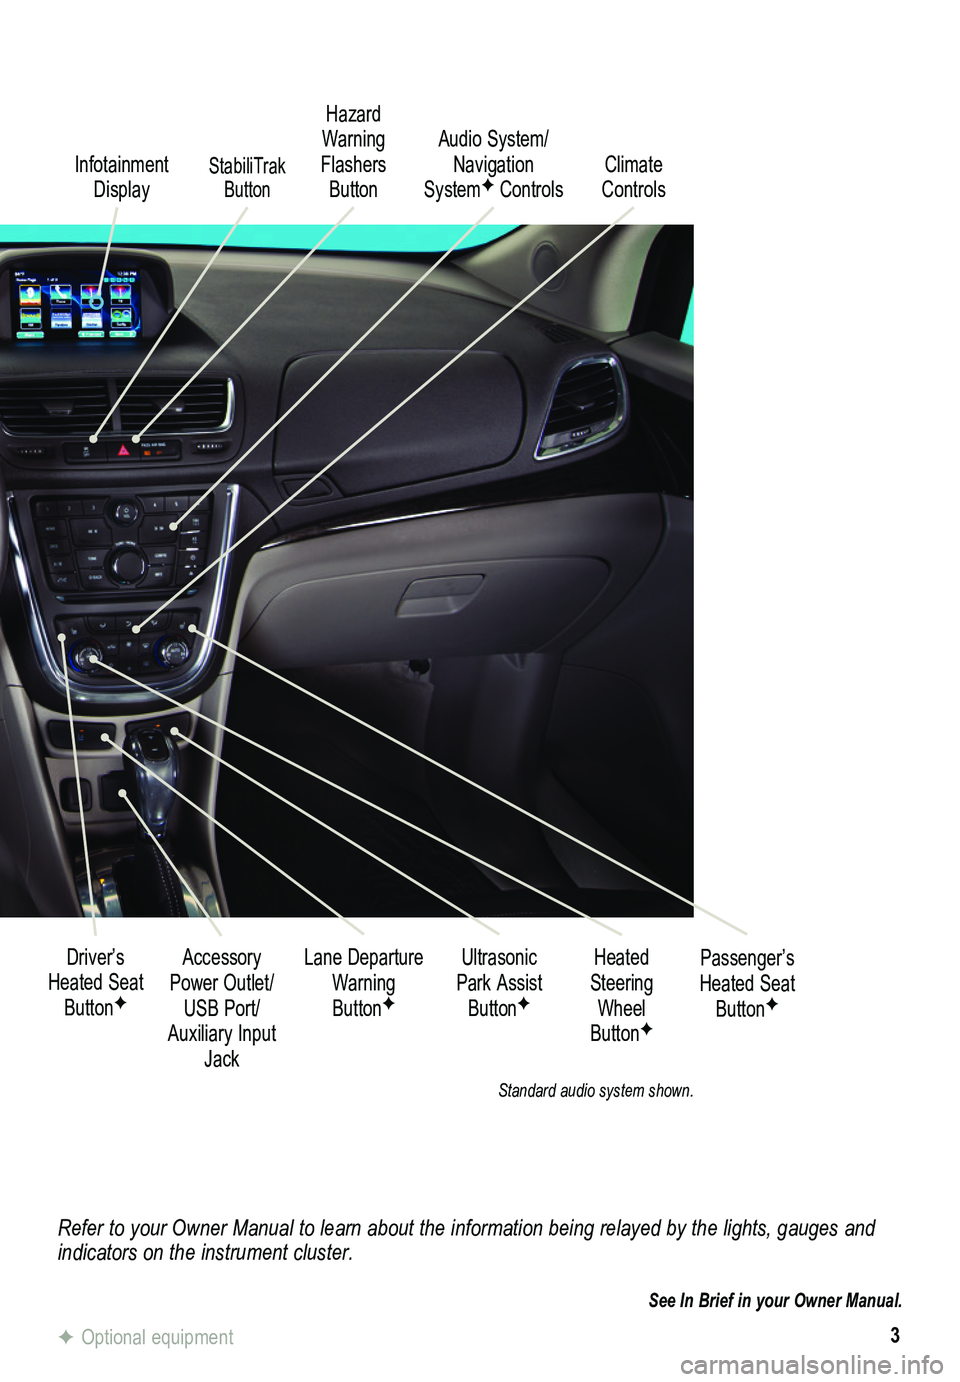 BUICK ENCORE 2015  Get To Know Guide 3
Refer to your Owner Manual to learn about the information being relayed \
by the lights, gauges and indicators on the instrument cluster.
See In Brief in your Owner Manual.
Infotainment Display
Ultr